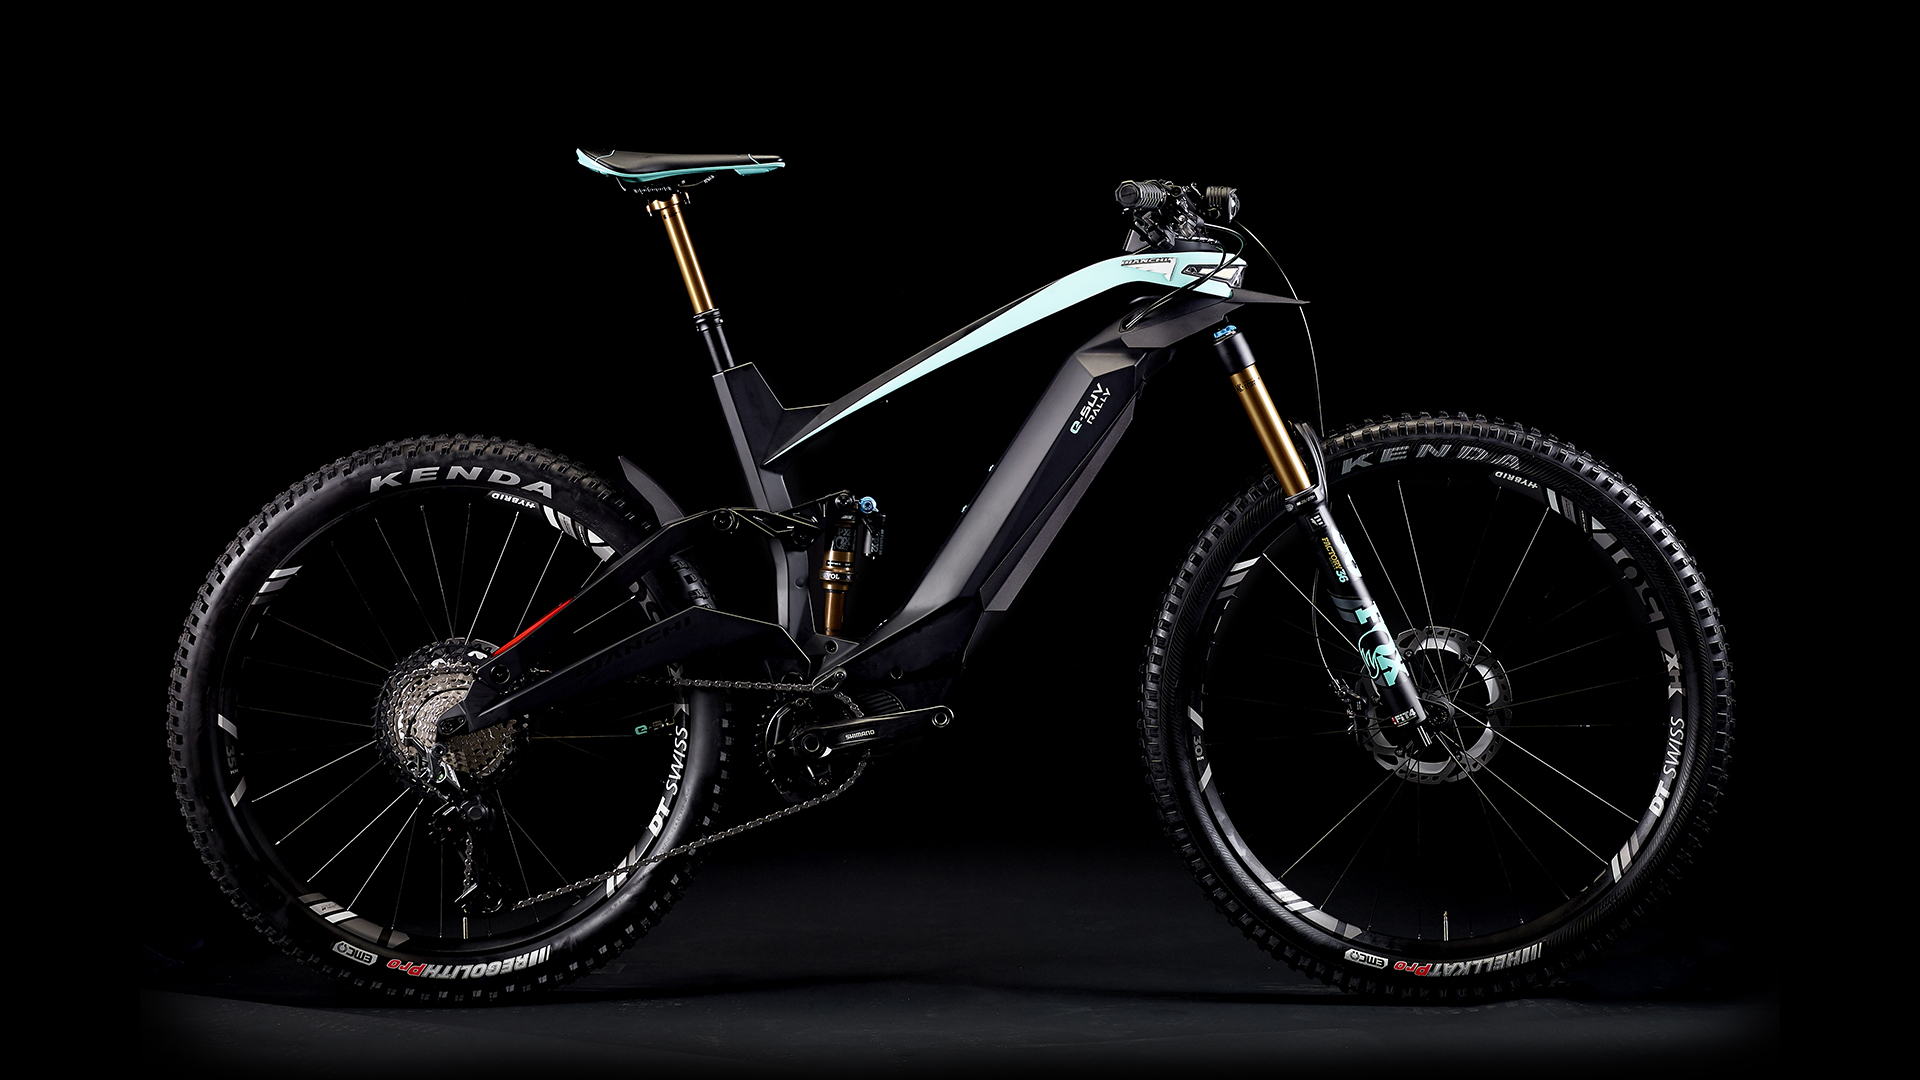 electric bike model and price